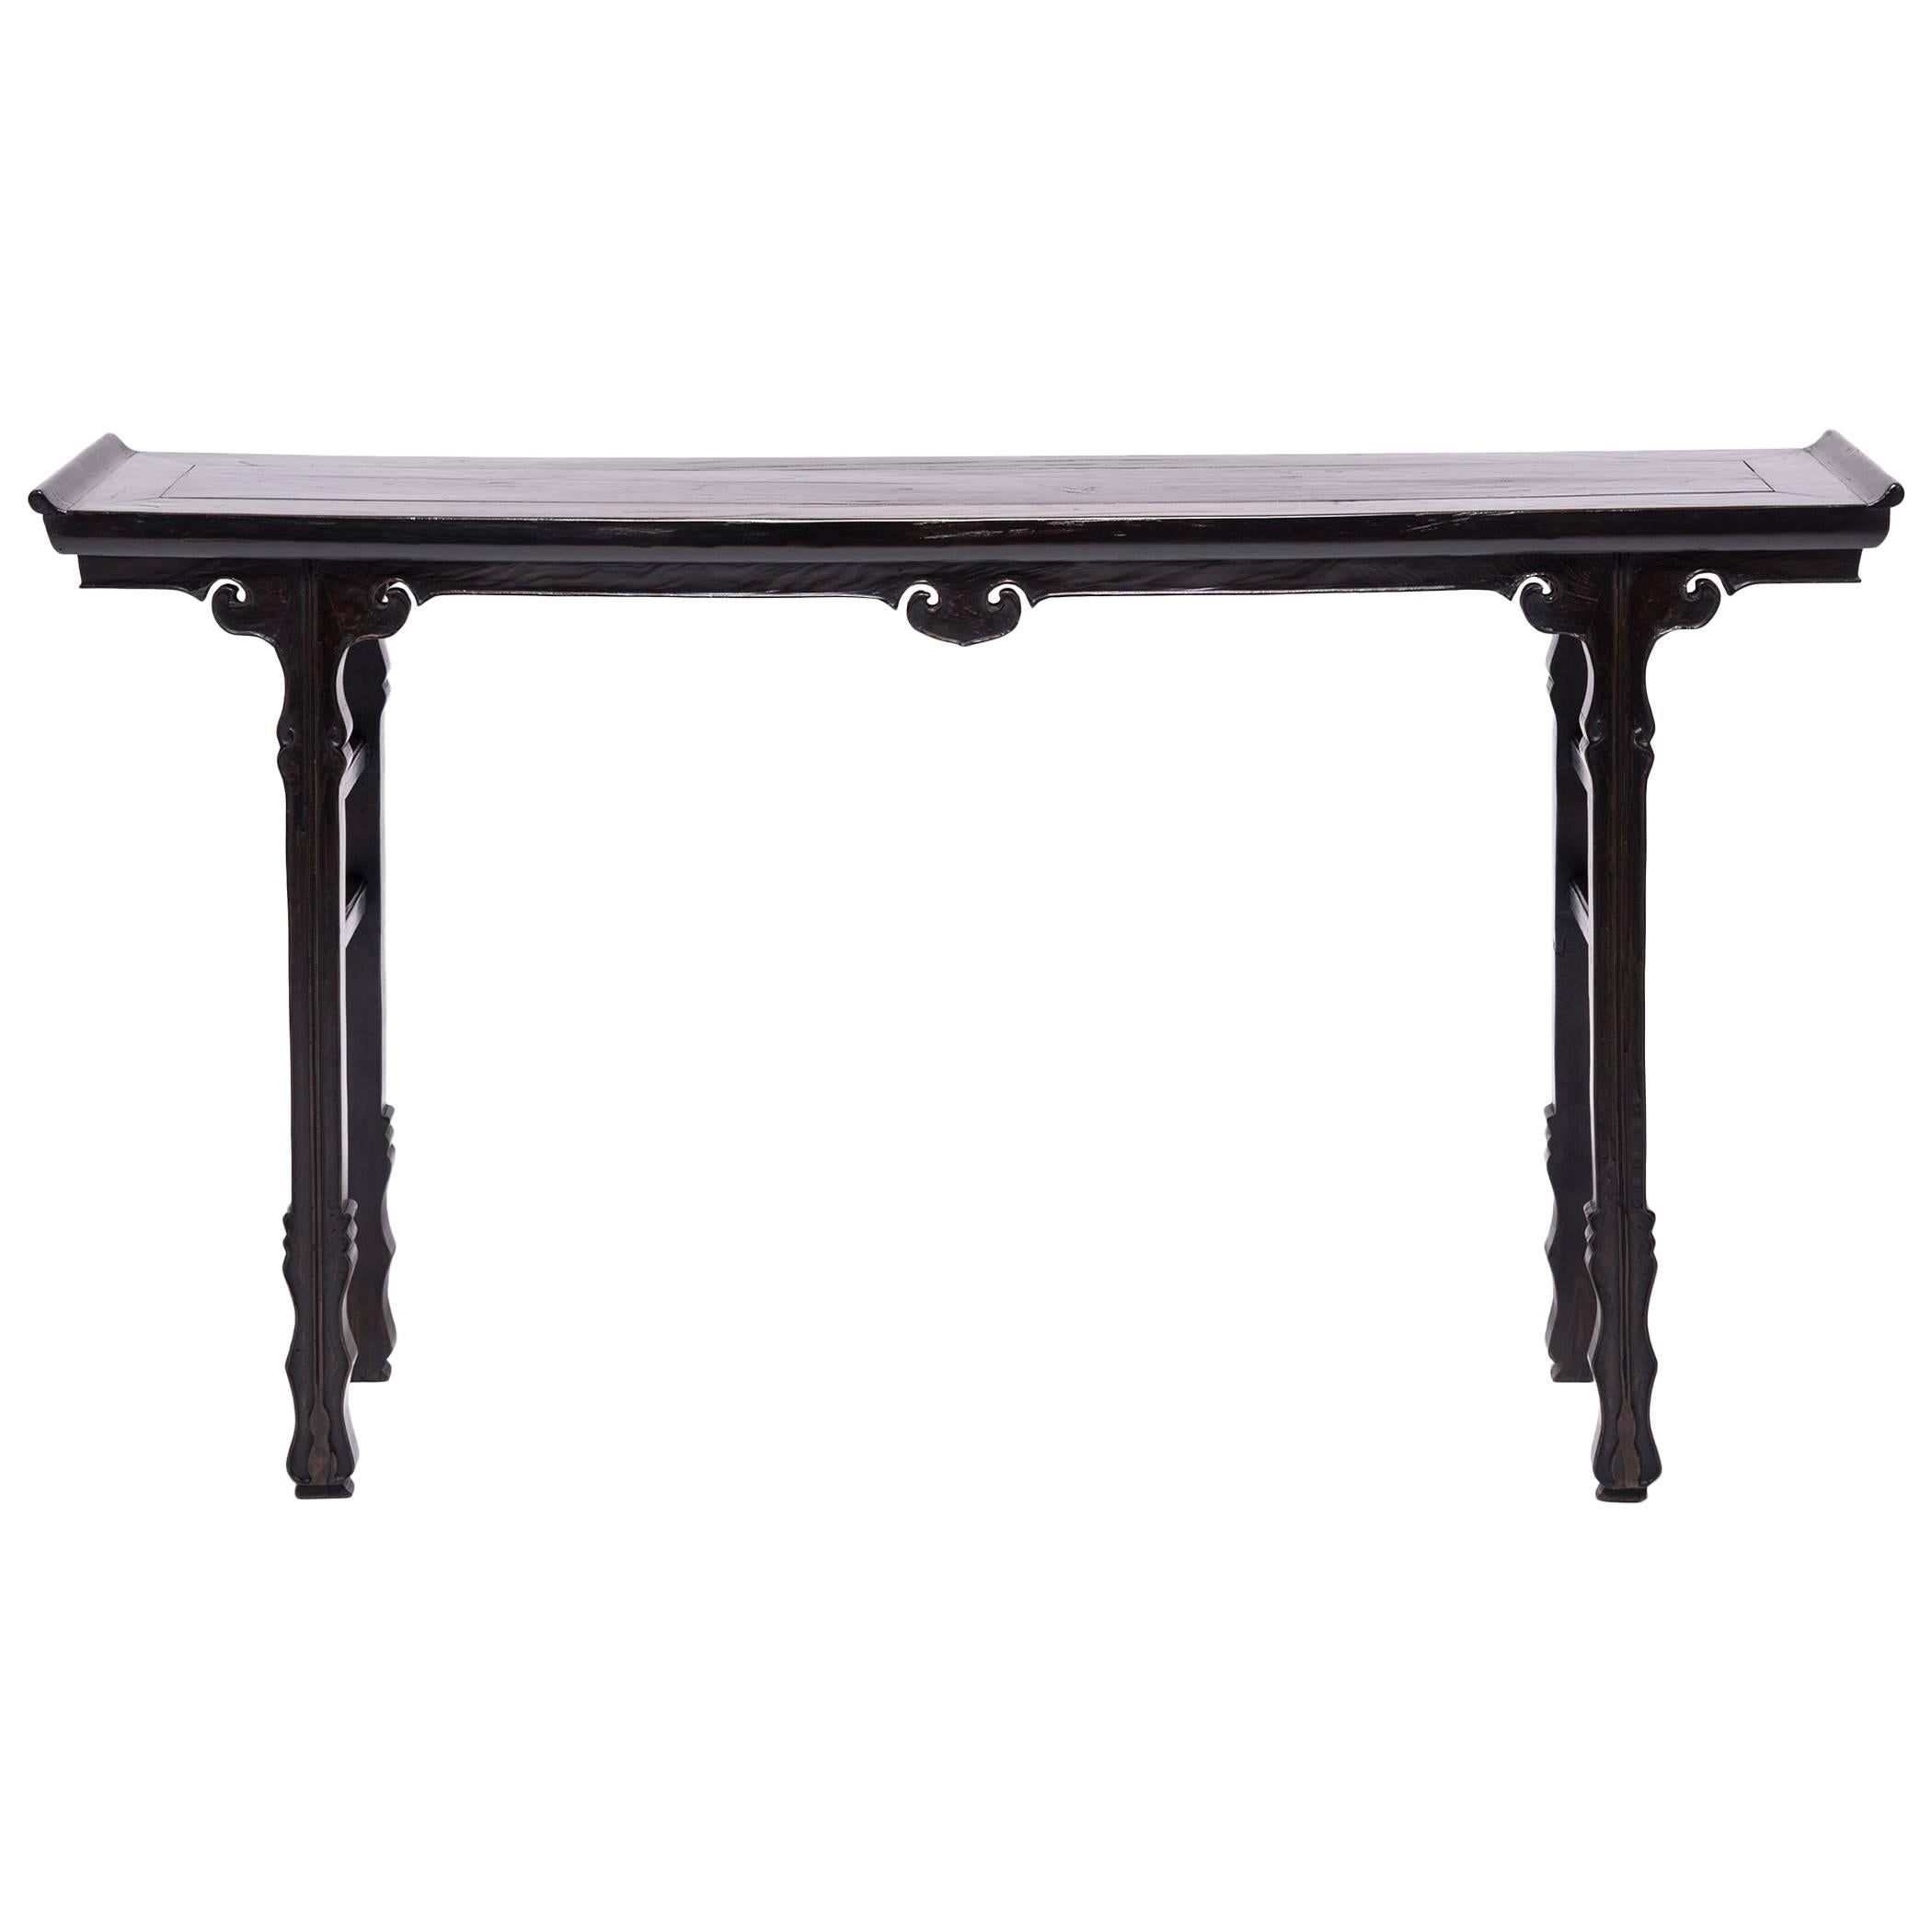 19th Century Chinese Shallow Sword Foot Altar Table with Ruyi Medallion